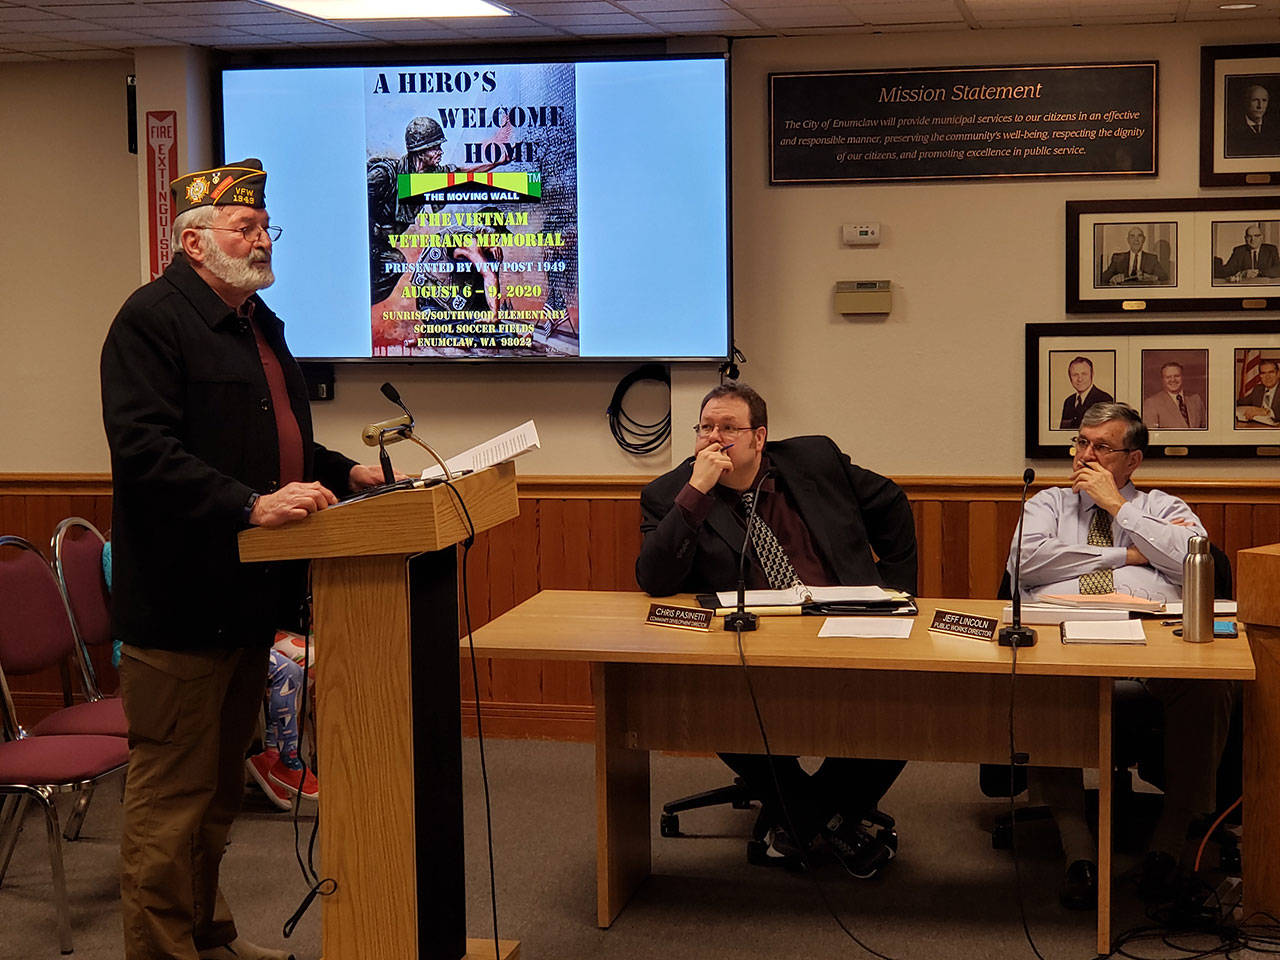 Keith Matthews of the Enumclaw VFW Post 1949 presented his plan for the moving Vietnam Memorial during the Feb. 10 council meeting. Photo by Ray Miller-Still